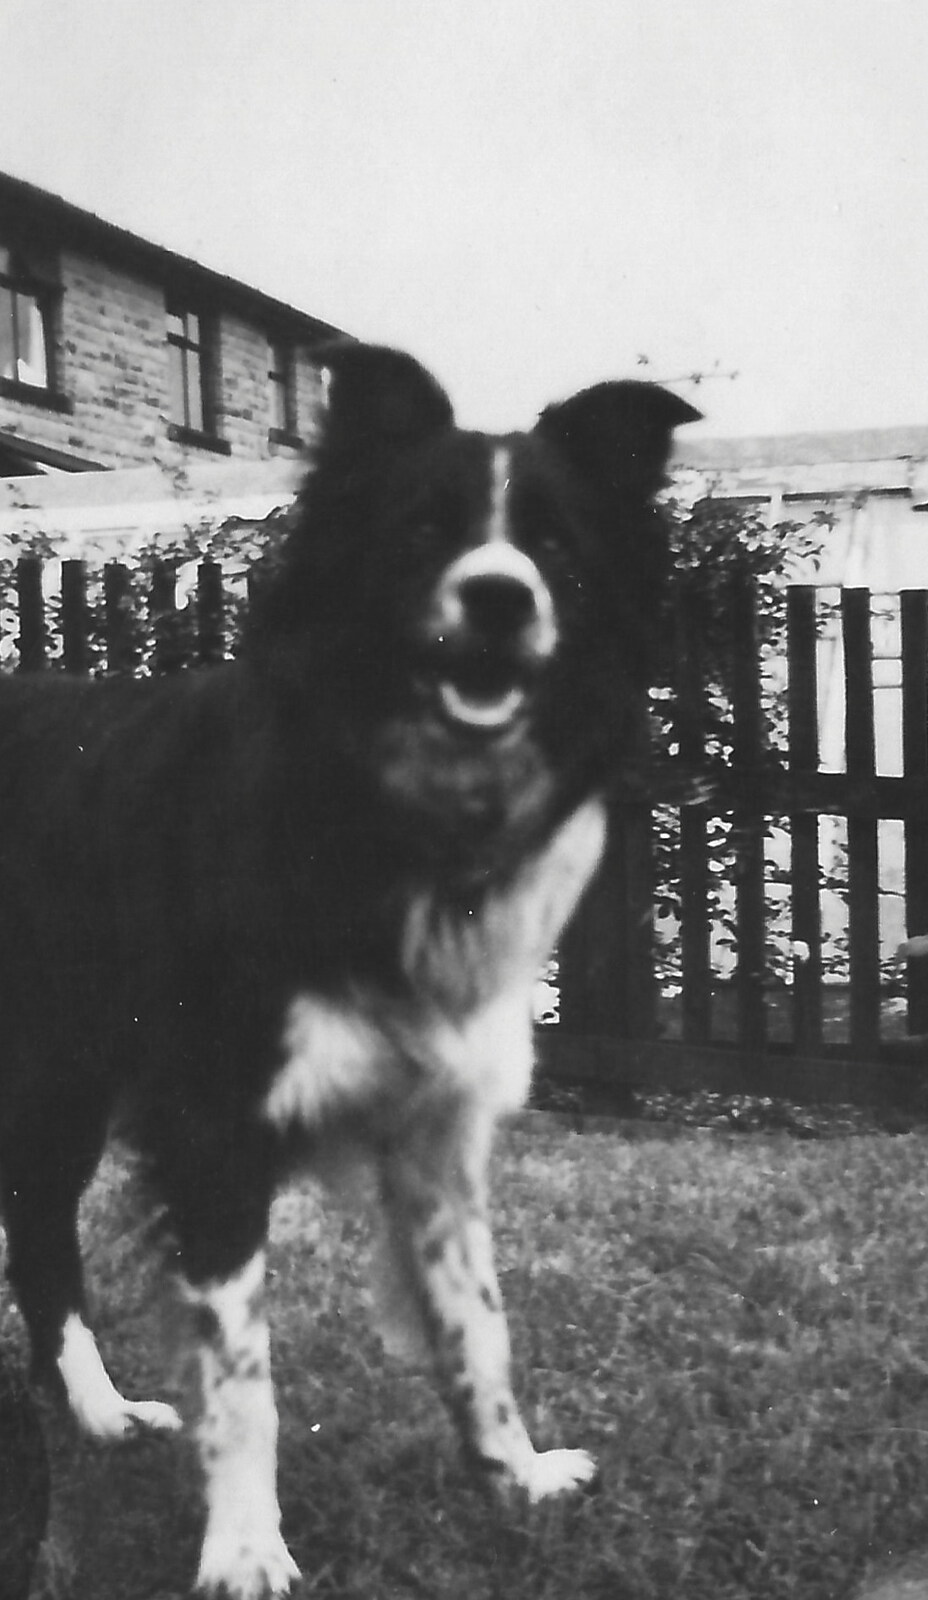 Family History: The 1940s and 1950s - 24th January 2020: Raff the dog